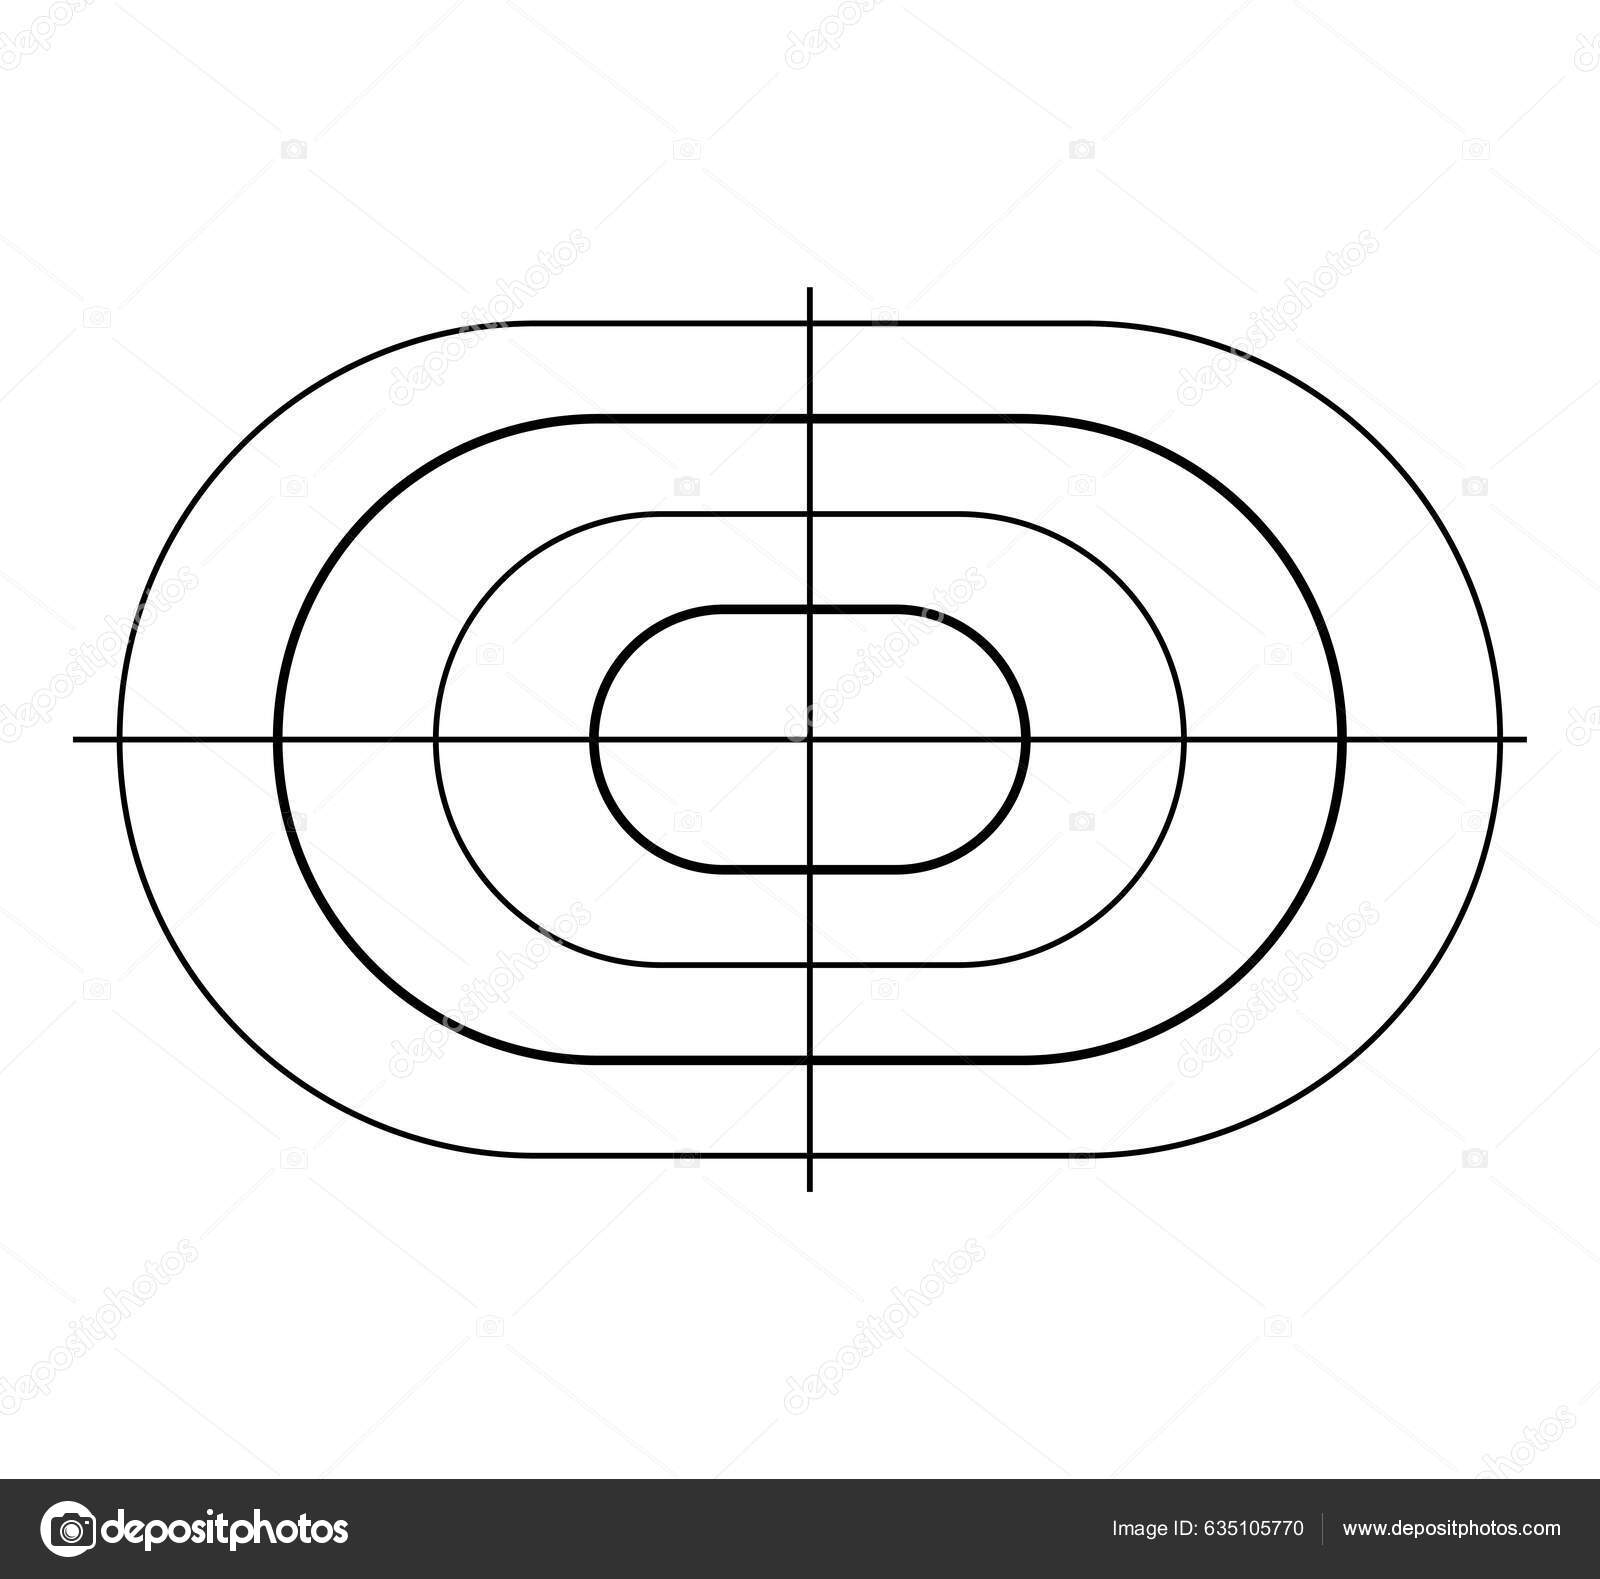 Target Black Isolated Cross Hair Target Stock Vector (Royalty Free